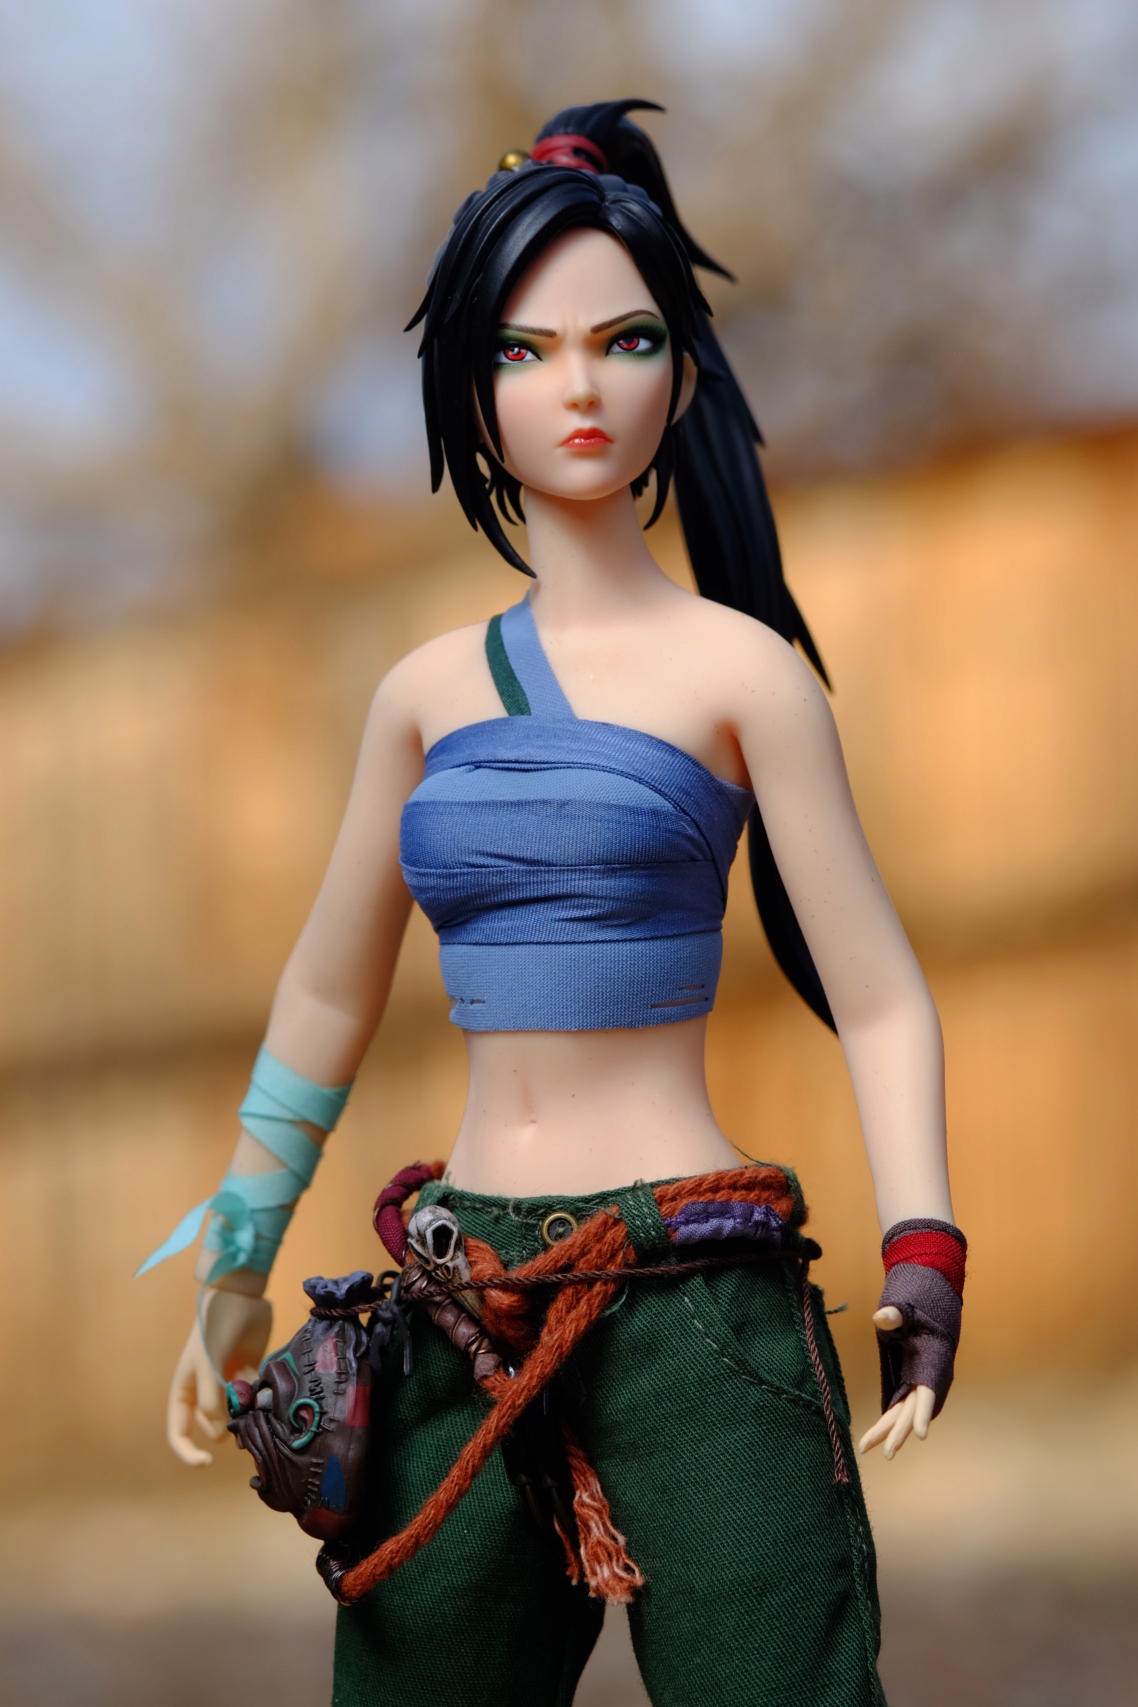 NEW PRODUCT: TBLeague: 1/6 scale Xiaoqing Verta International Edition Figure (Green & White Versions) Dscf0010